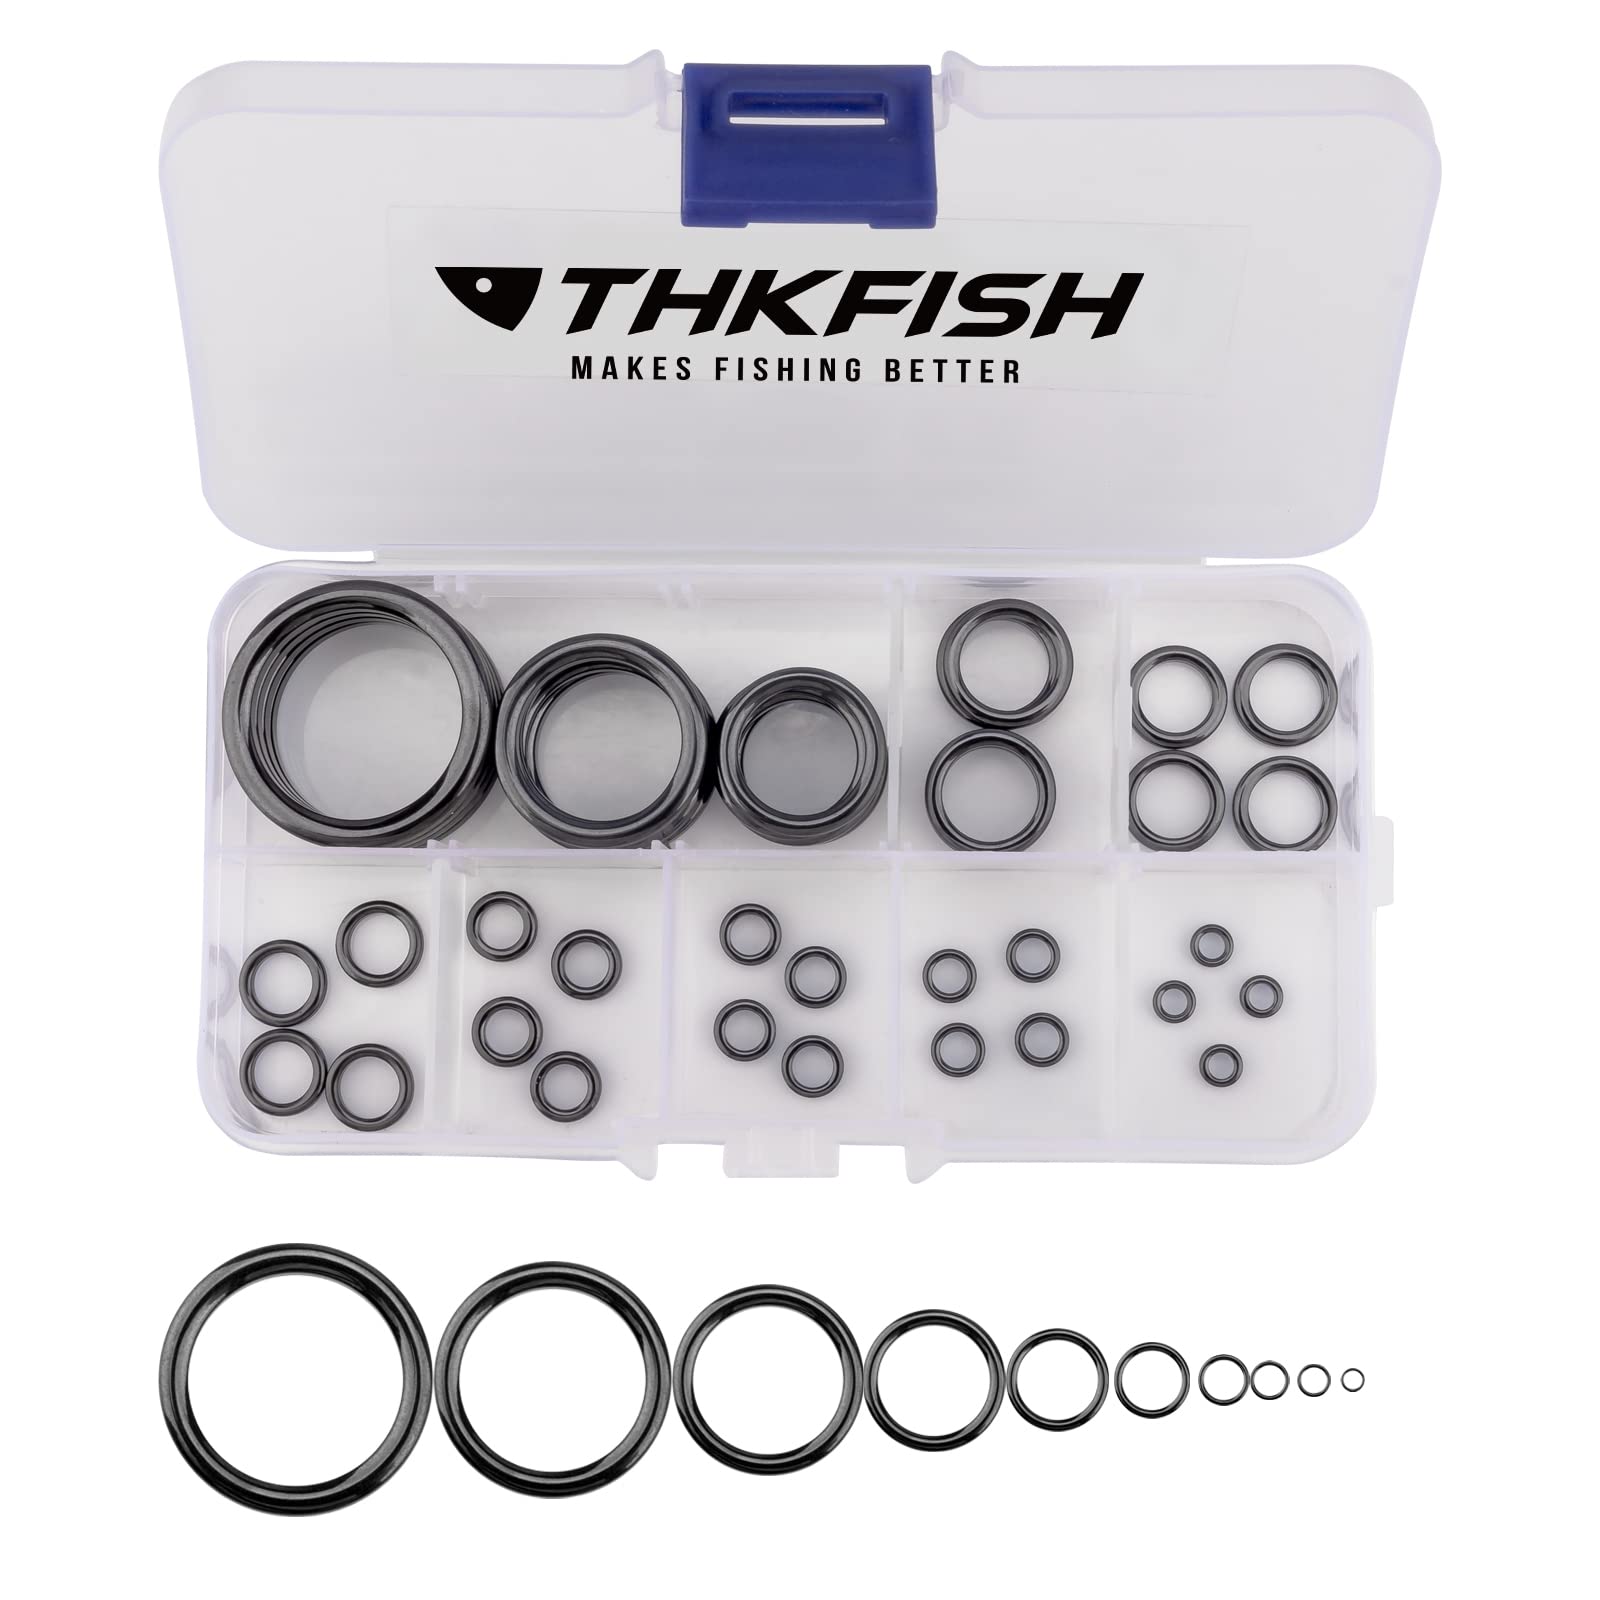  THKFISH Rod Tip Repair Kit with Glue Fishing Rod Repair Kit Pole  Tip Replacement Complete Supplies for Fishing Pole Top Eyelets 42PCS Tips,  6Sizes Black Small-42pcs : Sports & Outdoors